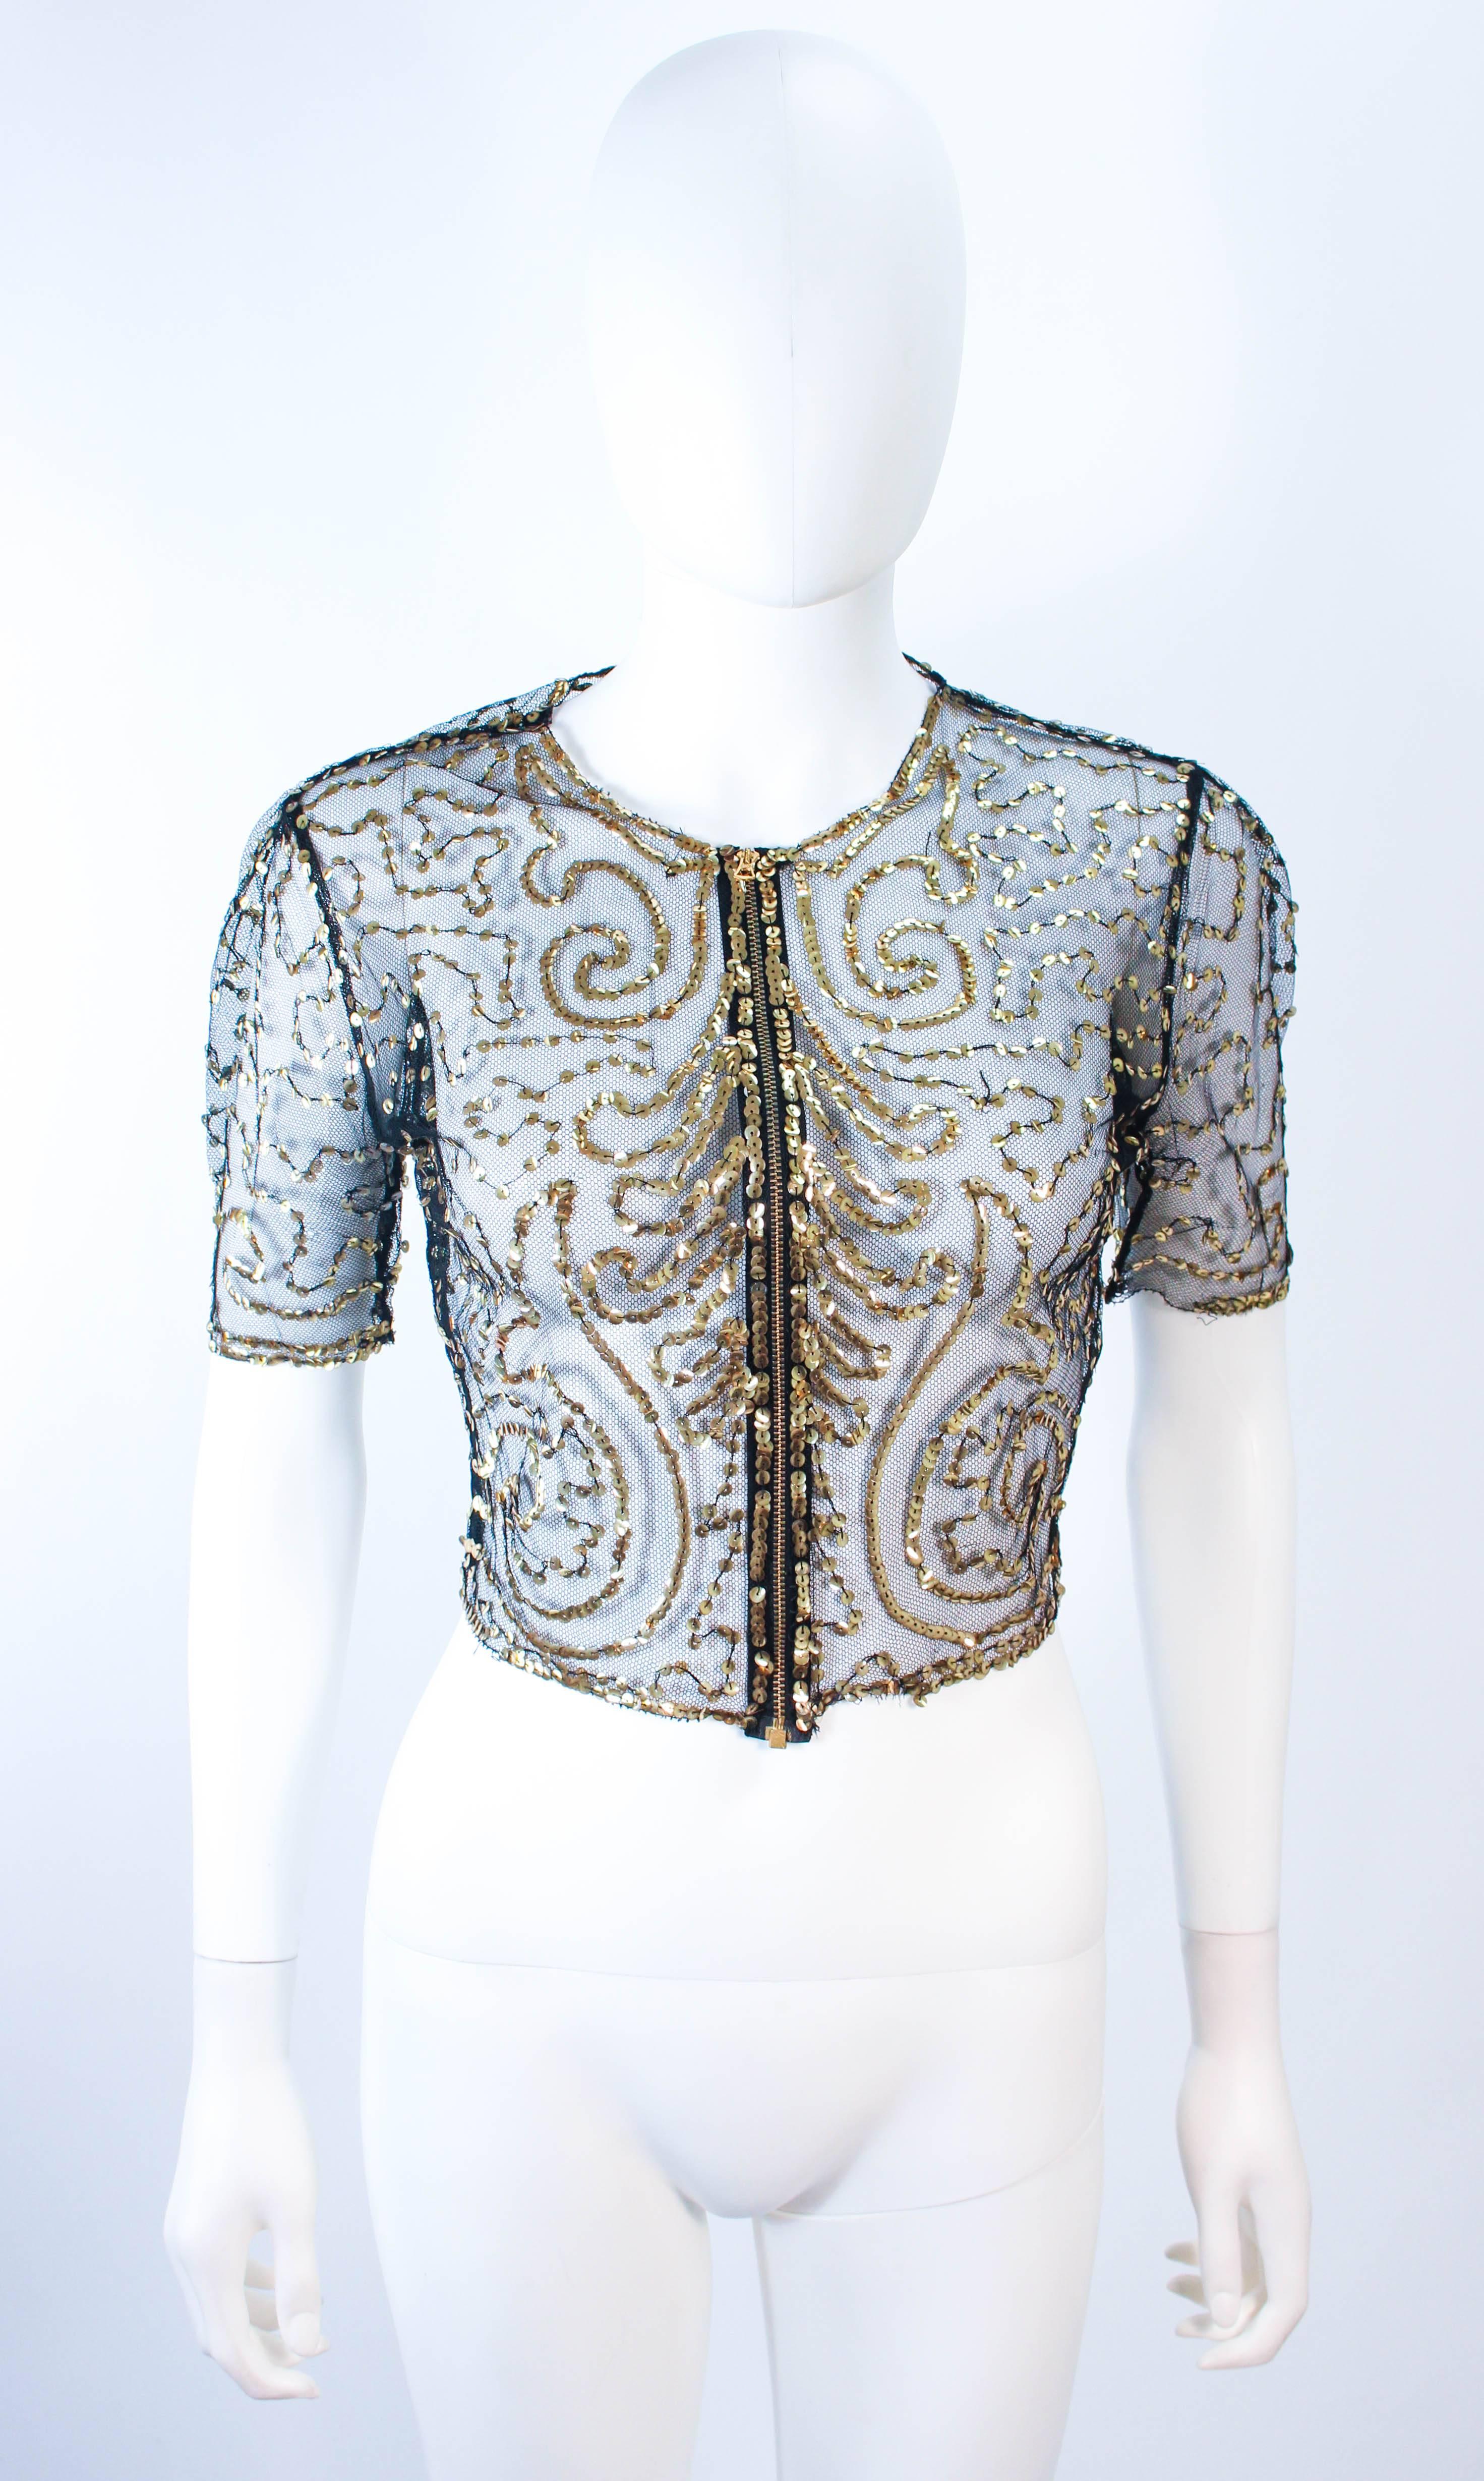 This antique jacket is composed of a sheer black mesh with gold sequin applique. Features a 3/4 sleeve. There is a center front zipper closure. In excellent vintage condition. 

**Please cross-reference measurements for personal accuracy. Size in